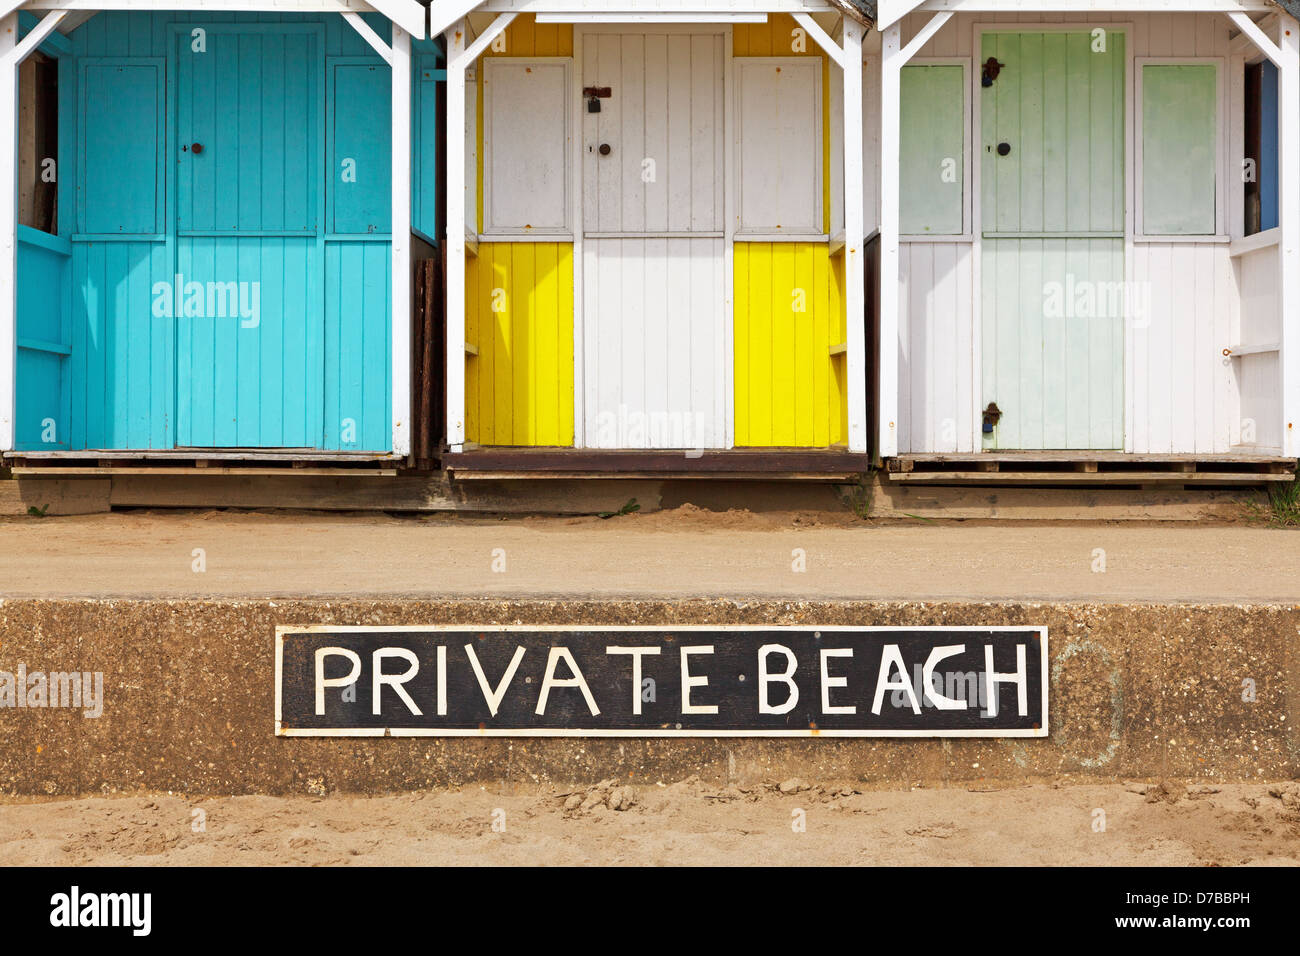 Old wooden beach huts on a Private beach with sign Stock Photo